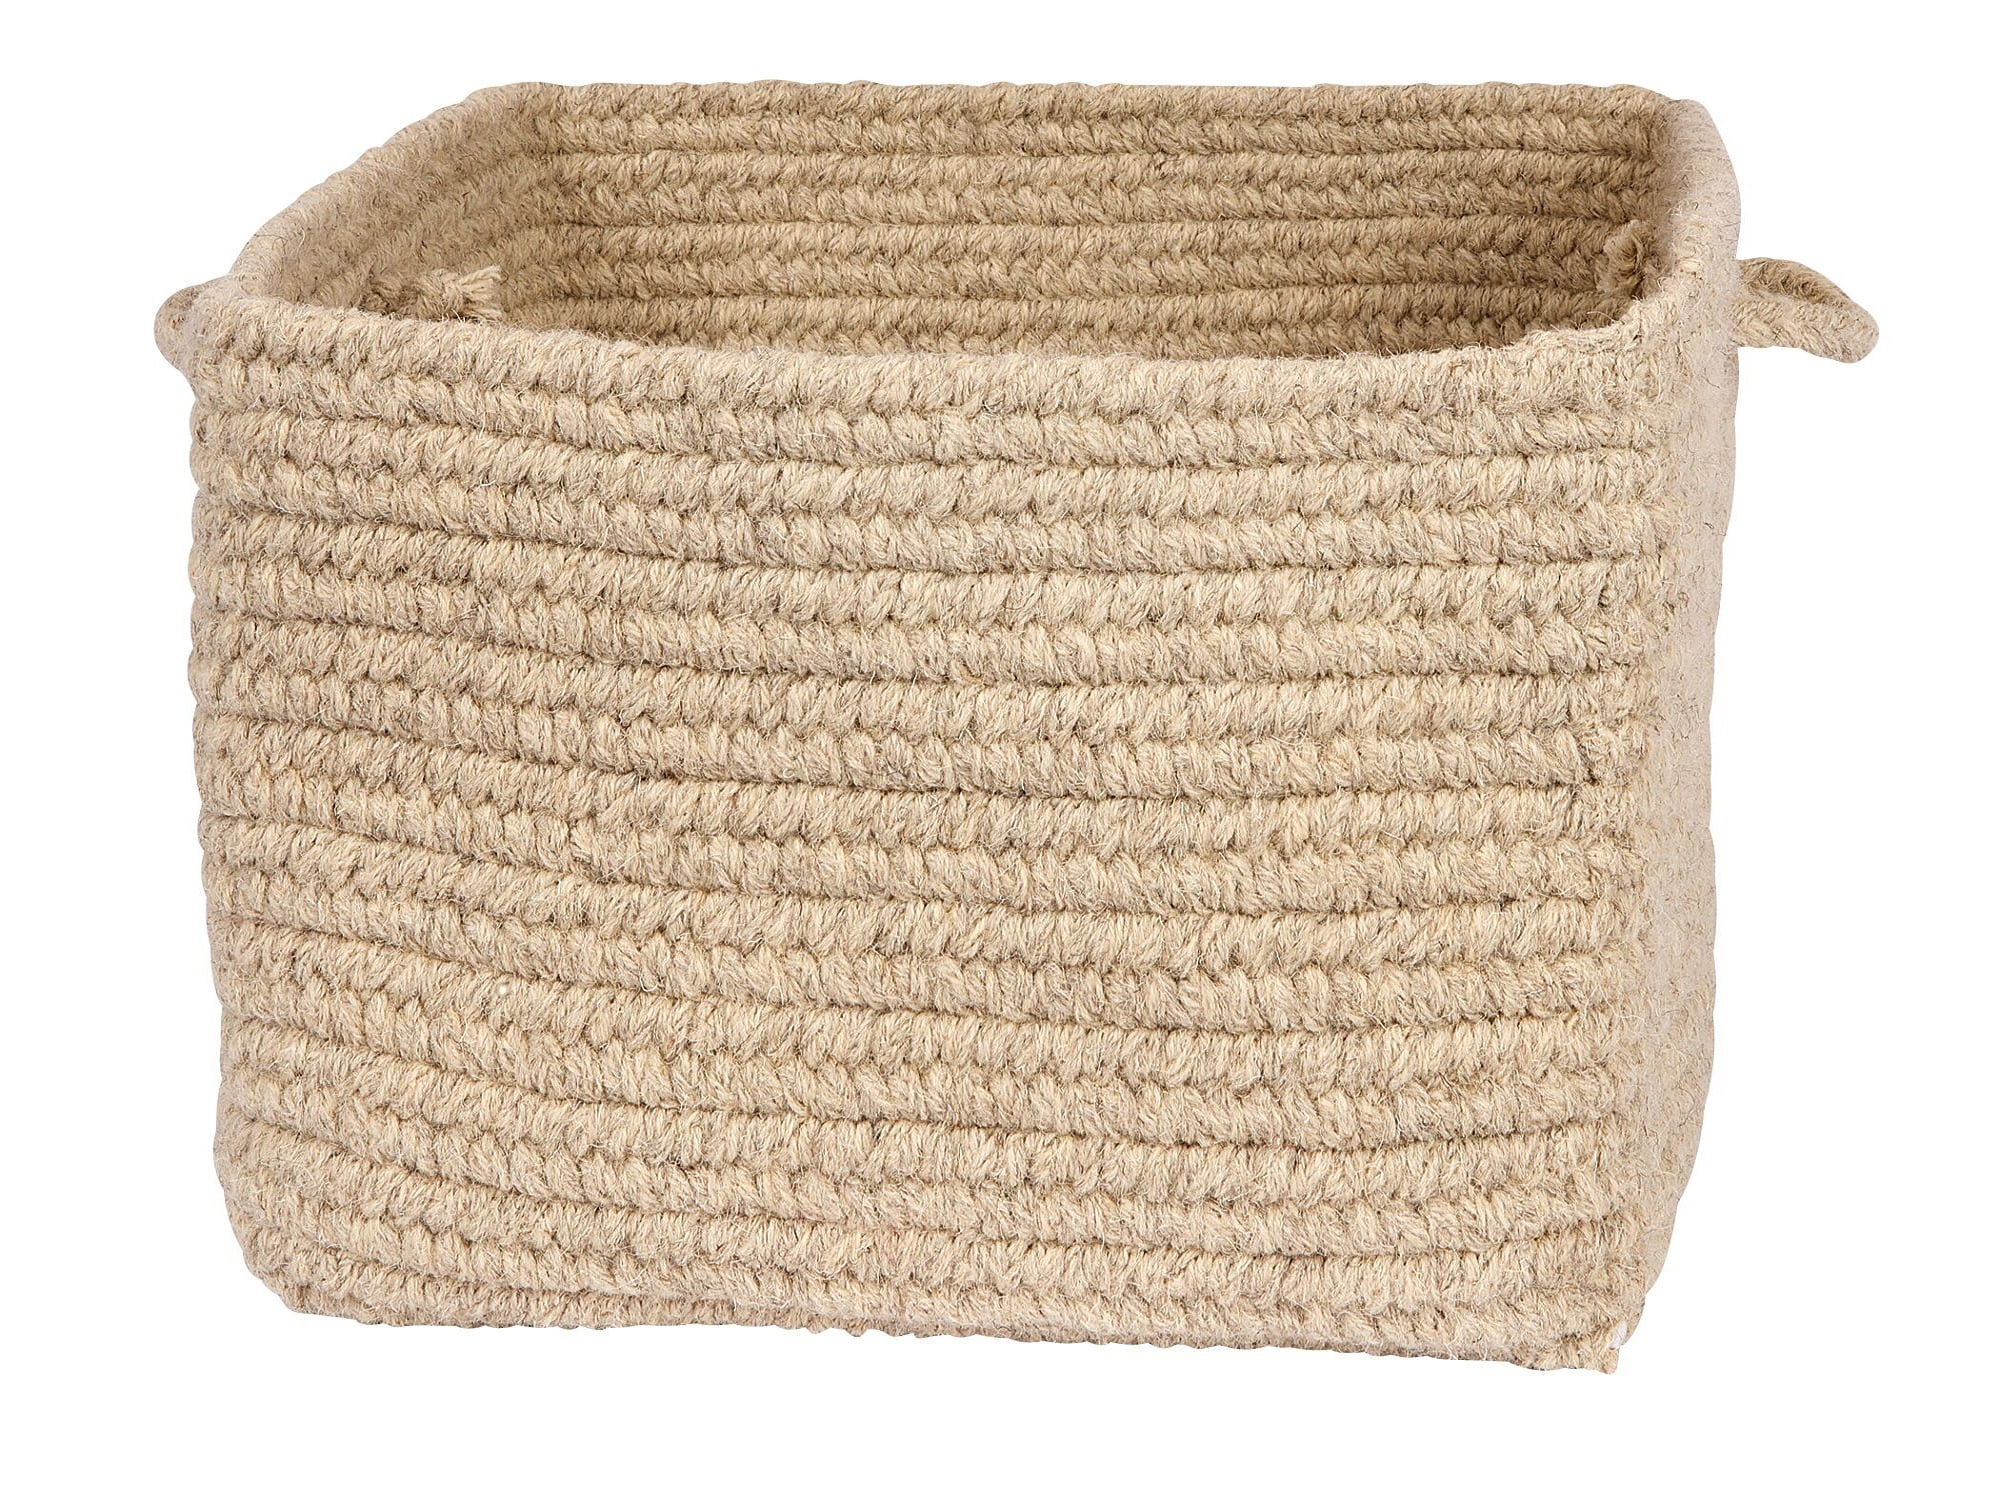 Colonial Mills Chunky Natural Wool Square Basket - Light Beige 14x10